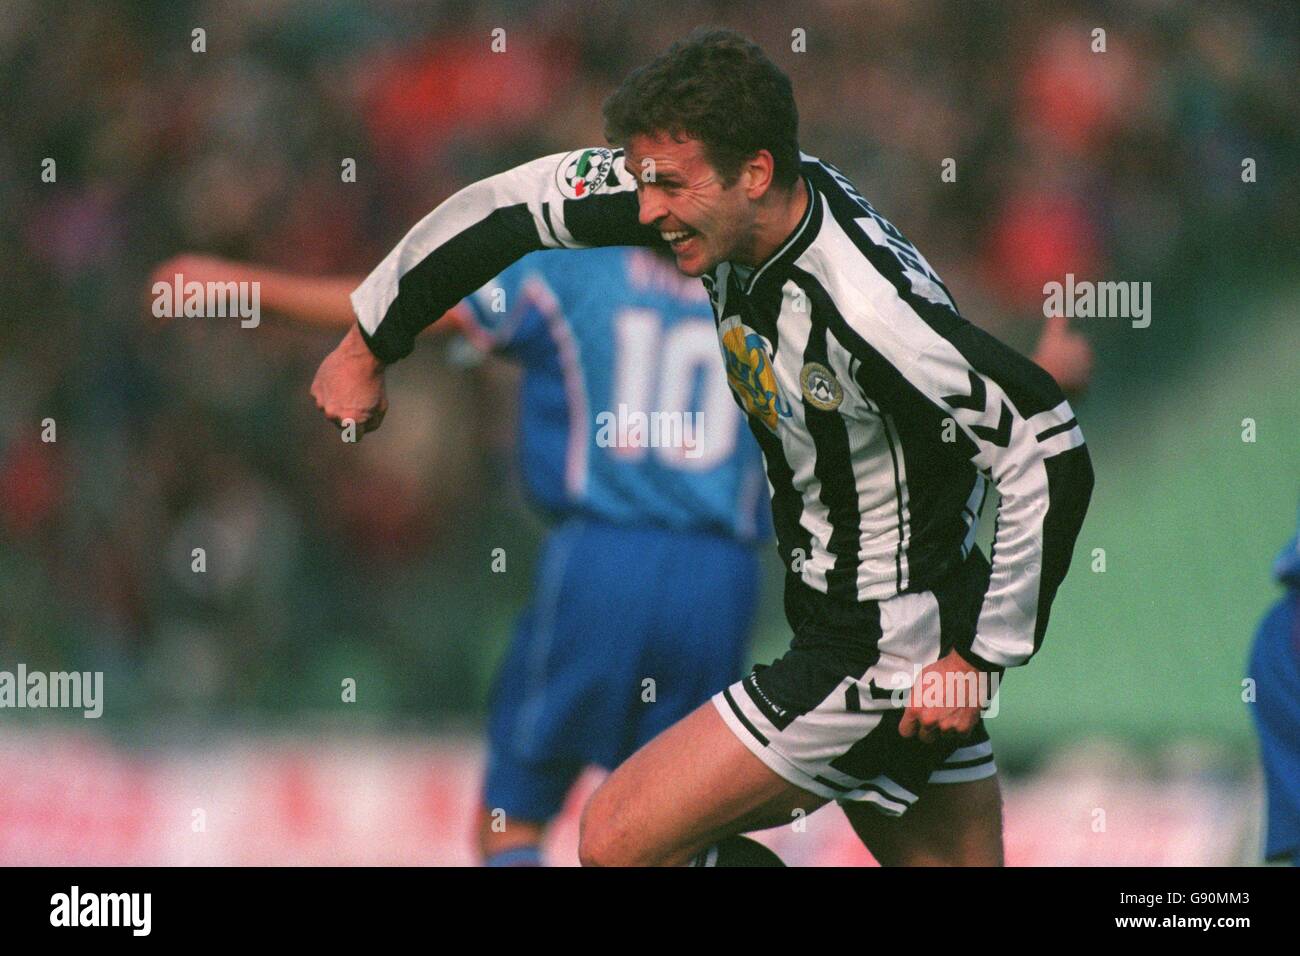 Calcio Italiano - Serie A - Udinese / Vicenza. Oliver Bierhoff, Udinese Foto Stock